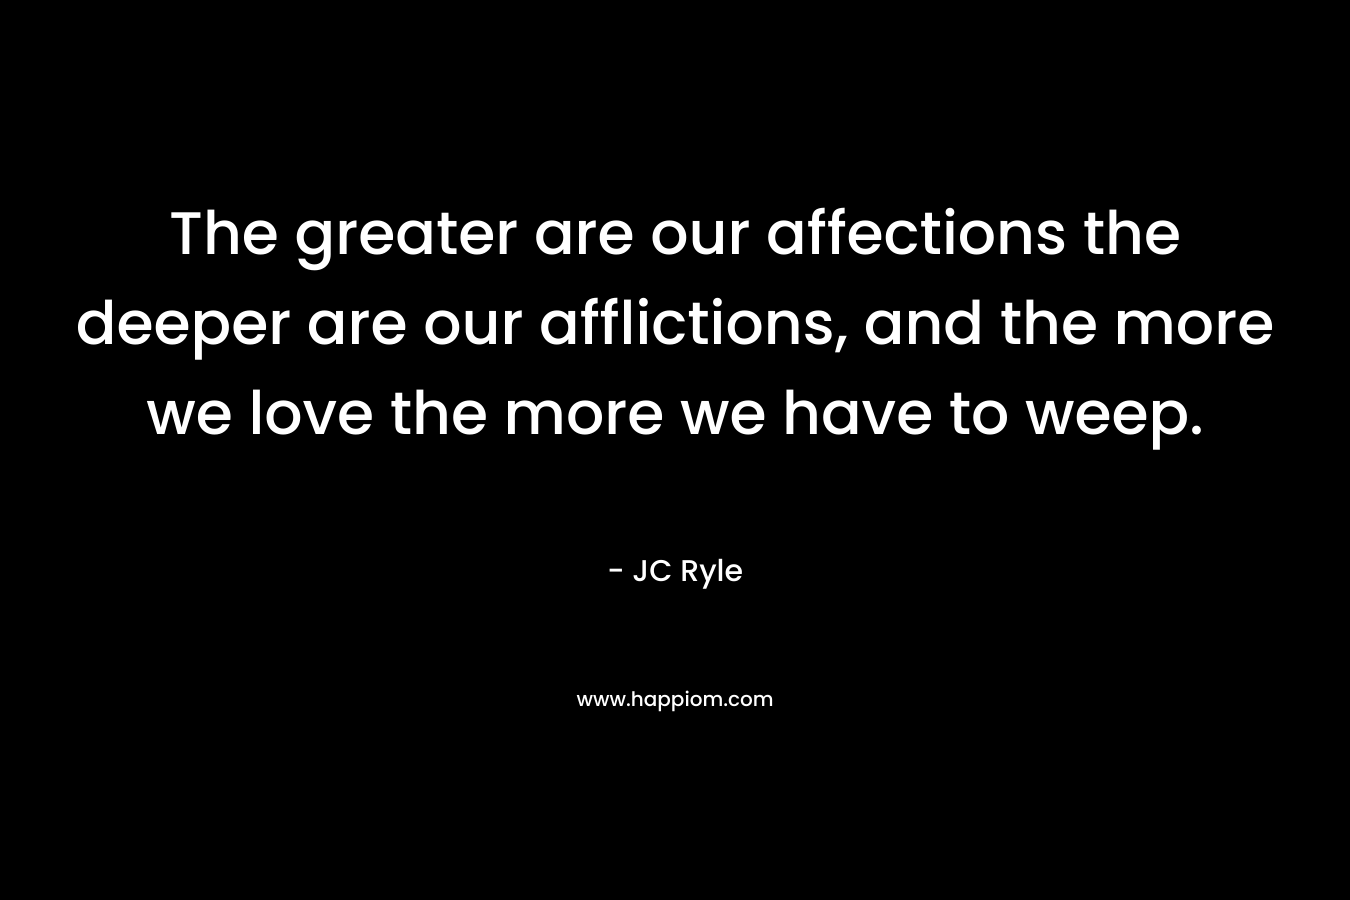 The greater are our affections the deeper are our afflictions, and the more we love the more we have to weep. – JC Ryle